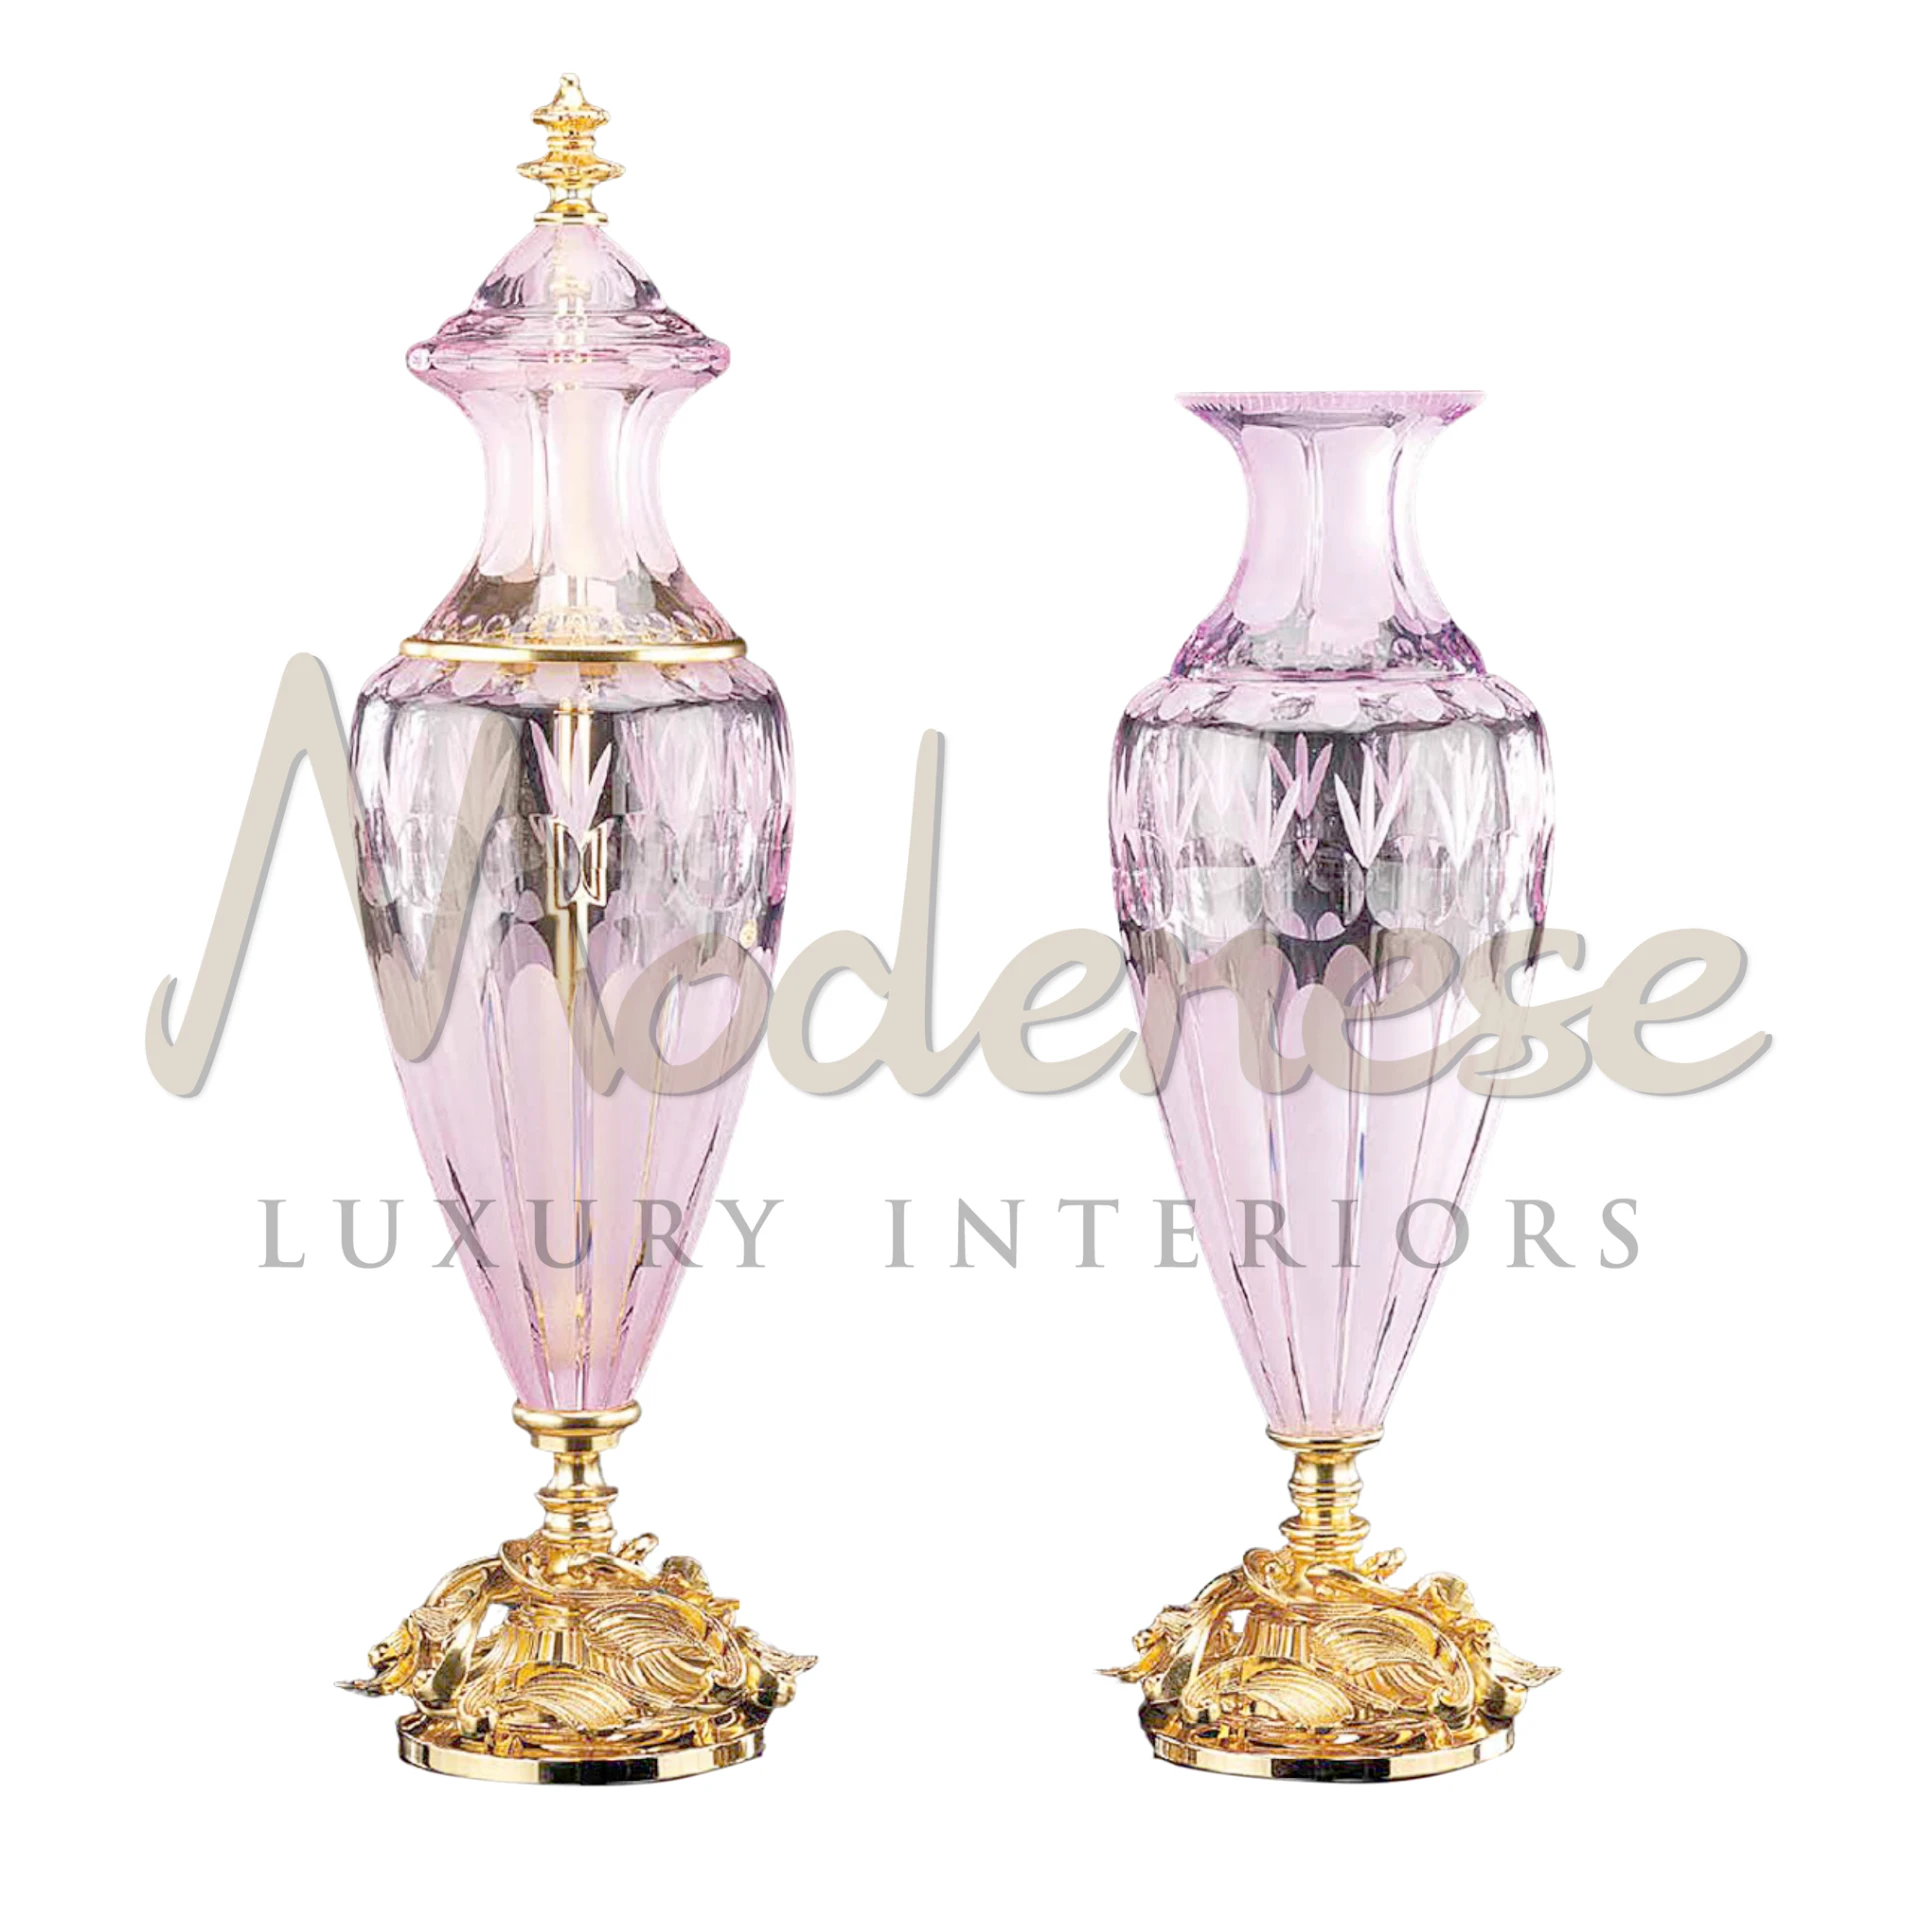 Imperial Tall Pink Vase, regal and luxurious in design, perfect for adding a sophisticated and elegant touch to luxury and classic interior settings.